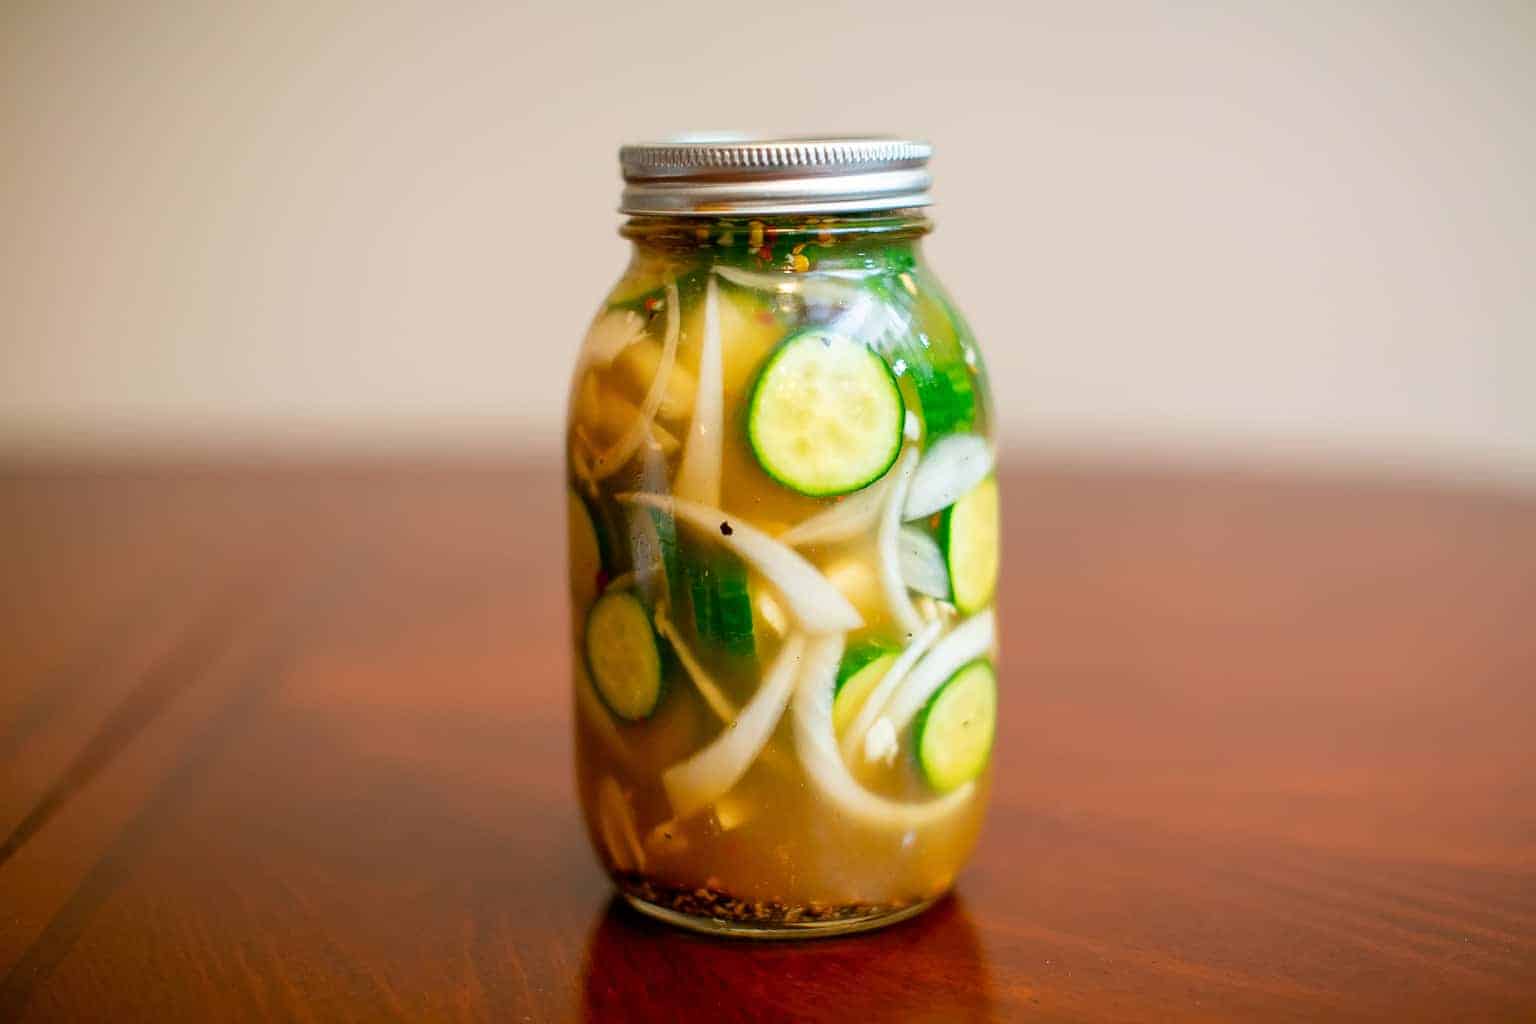 A closed jar full of spicy pickle juice placed on a brown wooden table